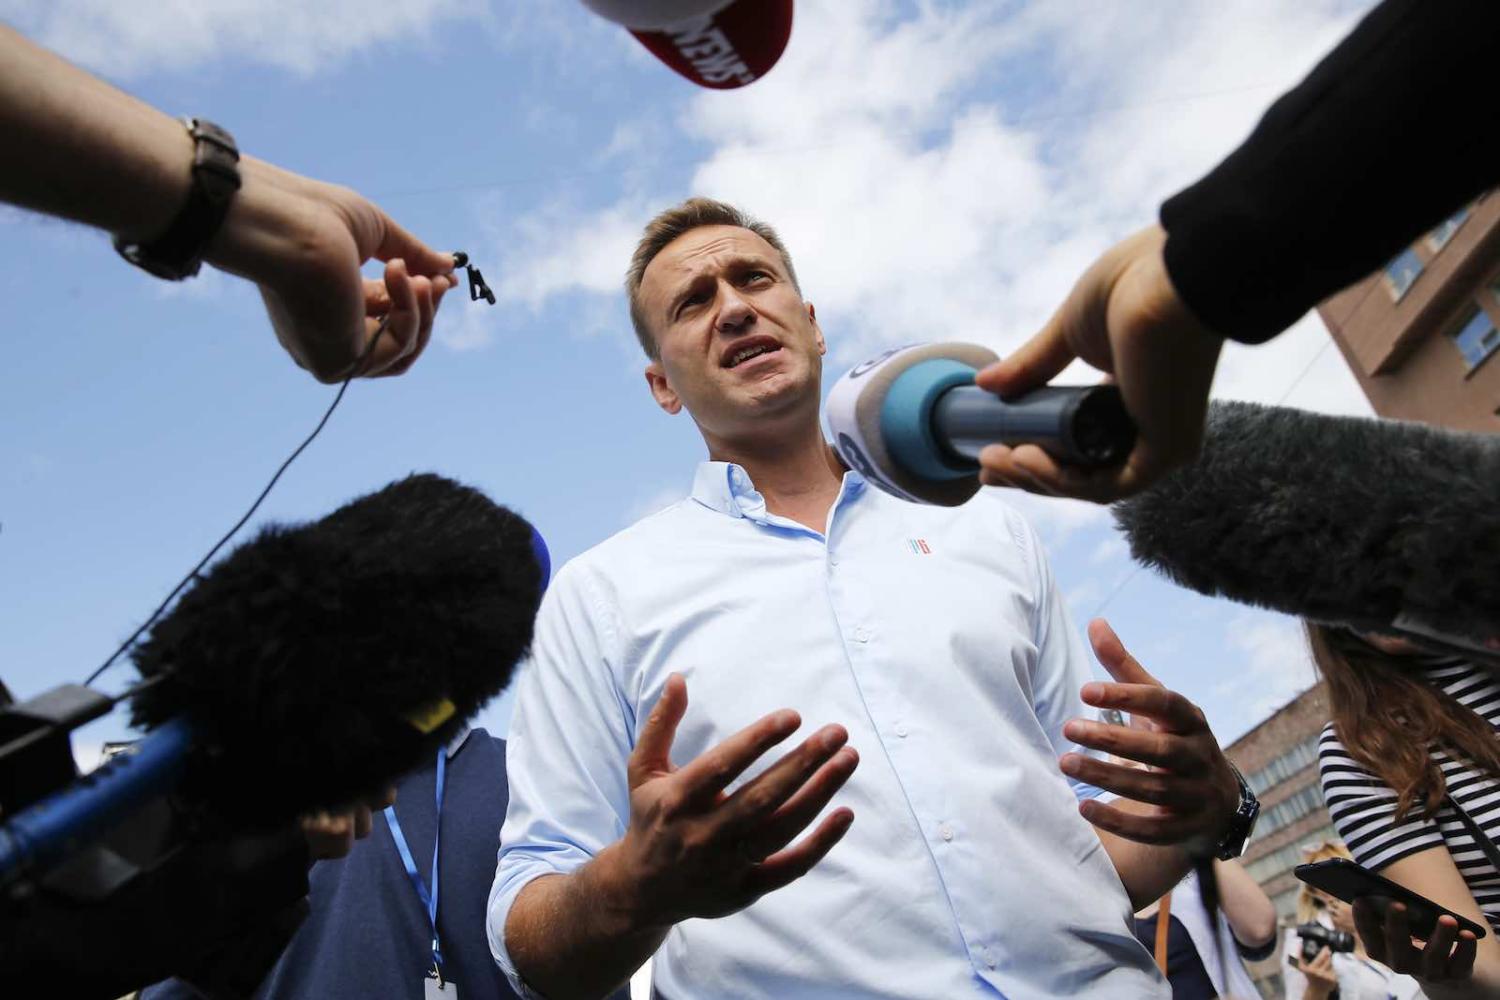 Russian opposition leader Alexei Navalny in July 2019 (Maxim Zmeyev/AFP via Getty Images)